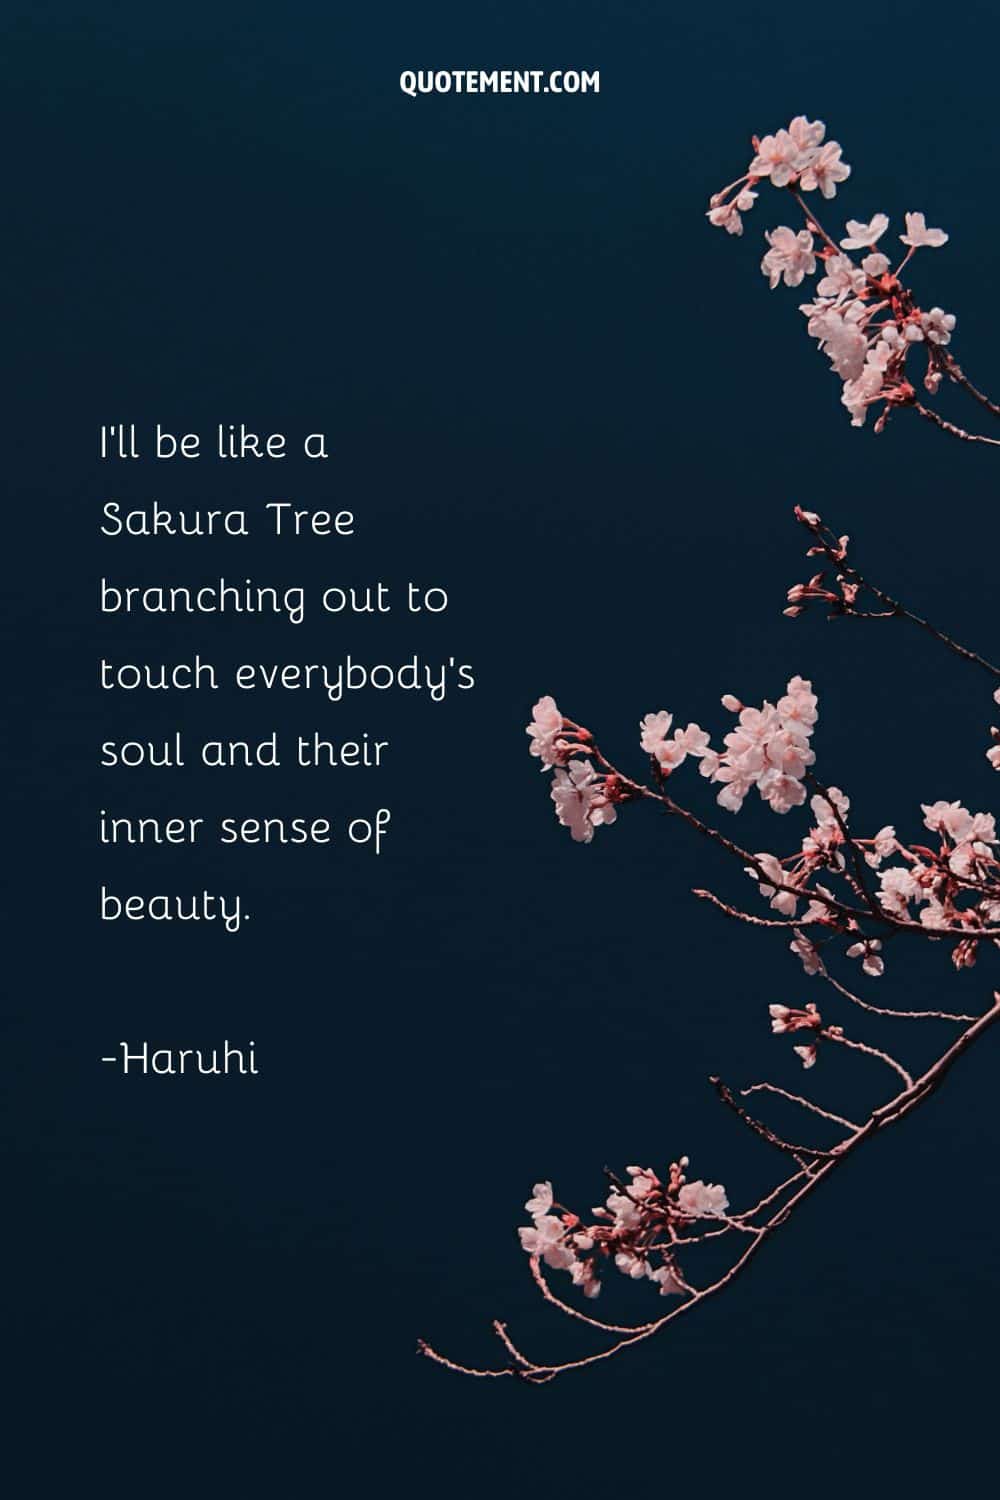 I’ll be like a Sakura Tree branching out to touch everybody’s soul and their inner sense of beauty